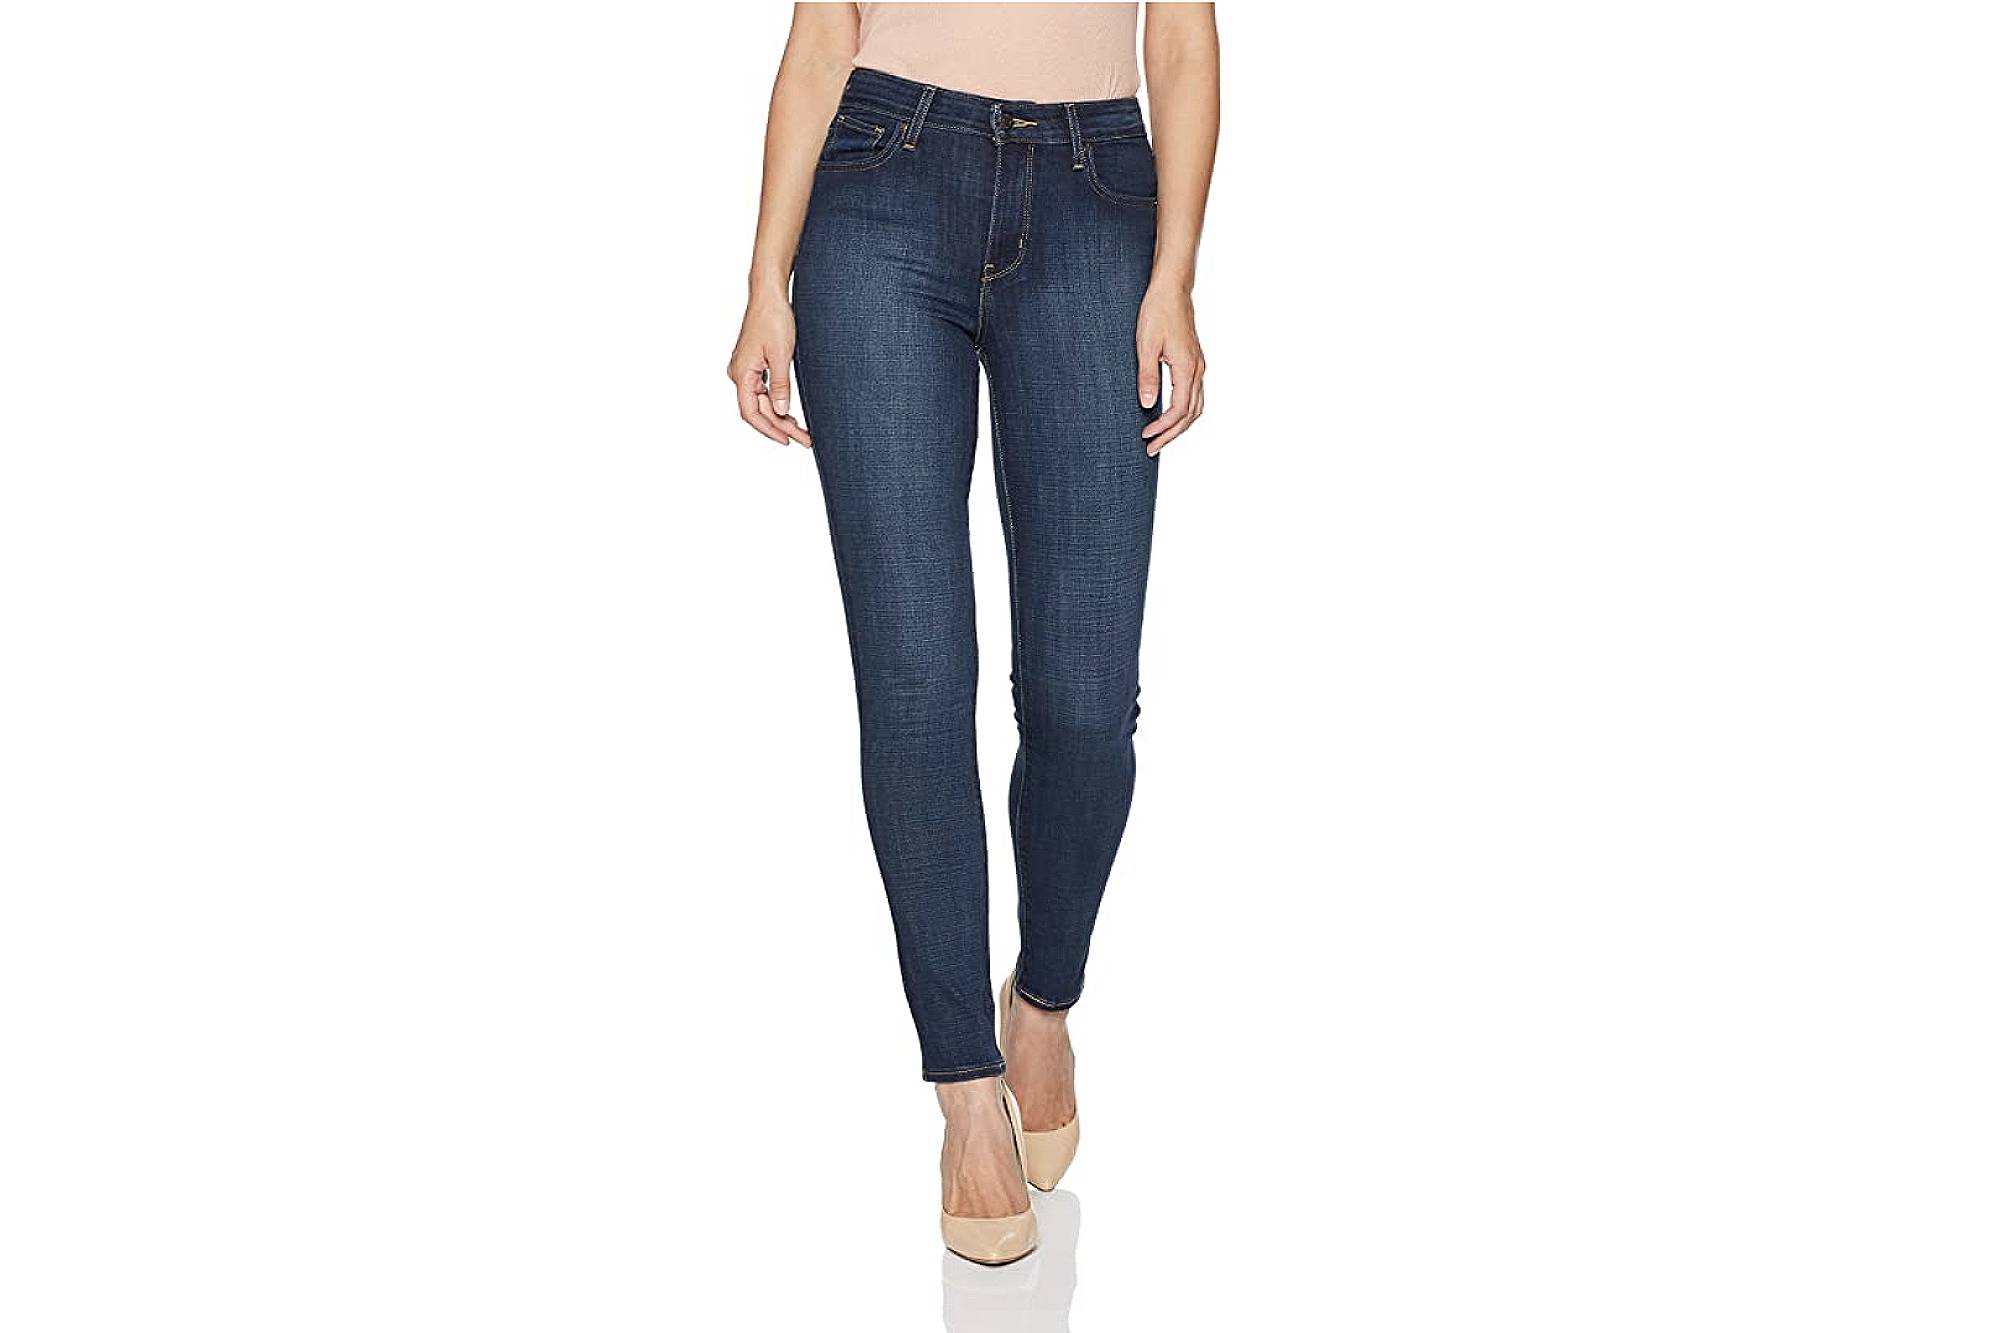 Levi's Classic Skinny Jeans Are on Sale 